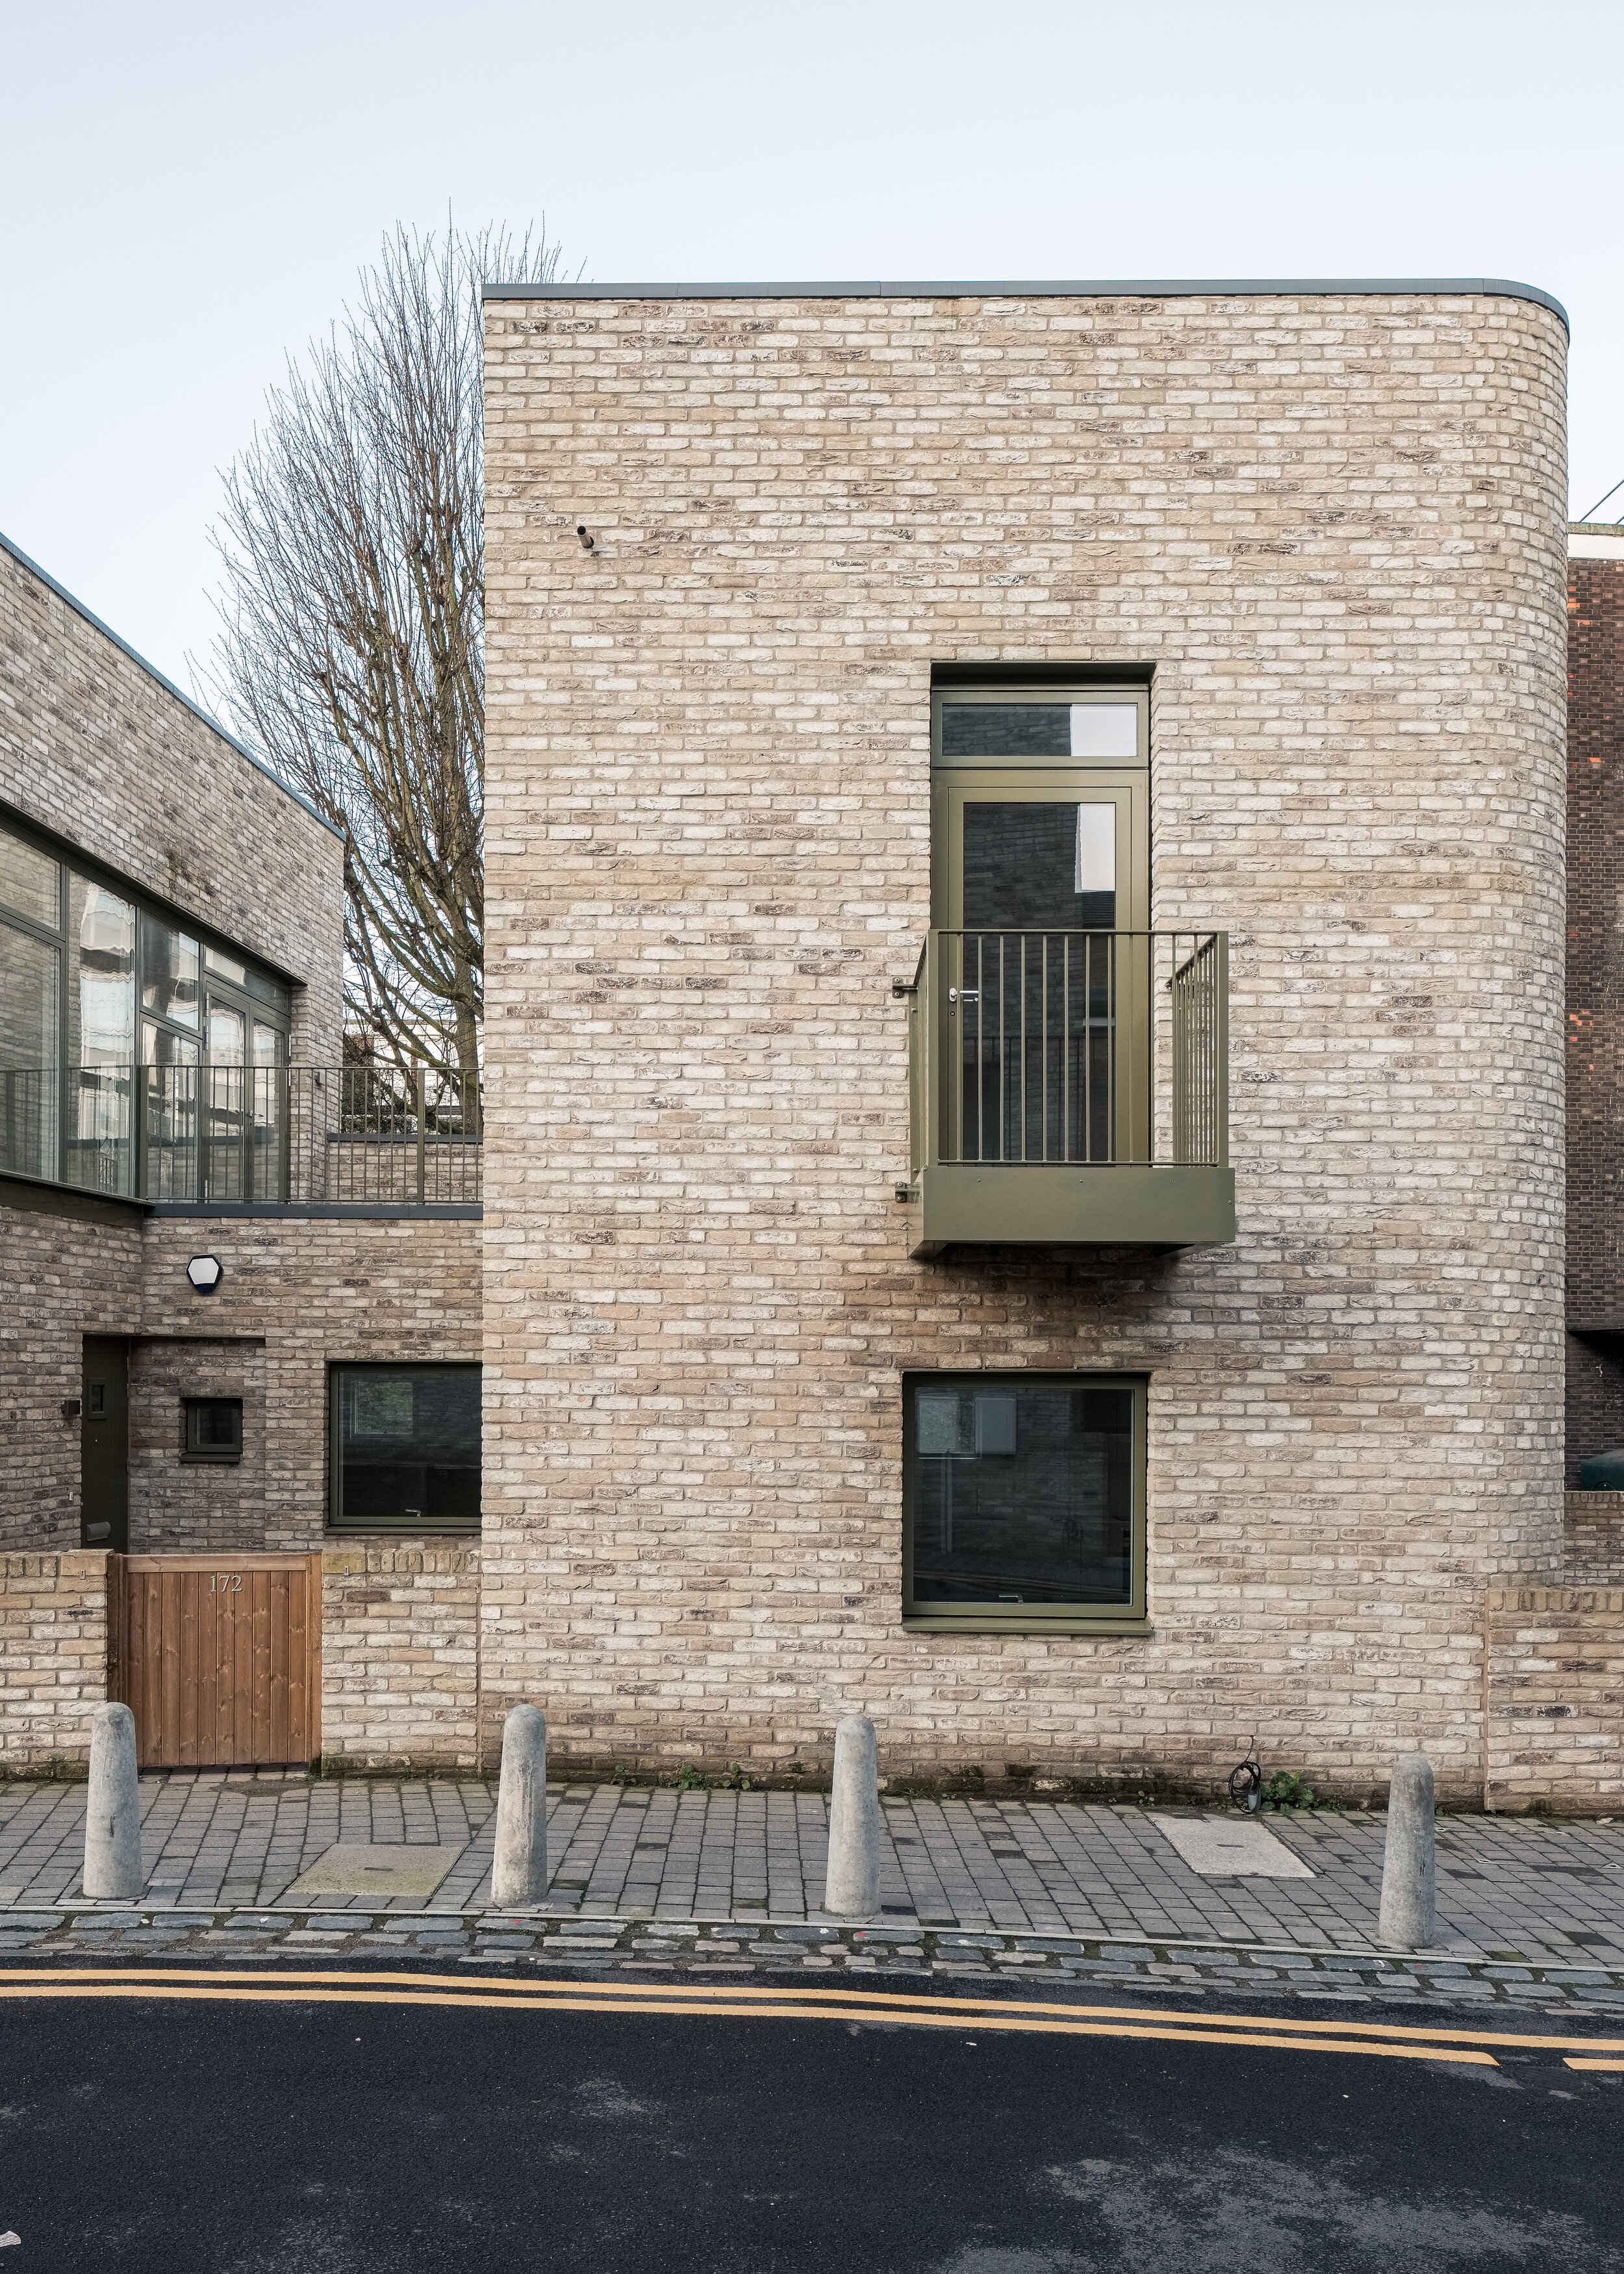 Fred+Howarth+Photography_Kiln+Place_Peter+Barber+Architects_17.jpg